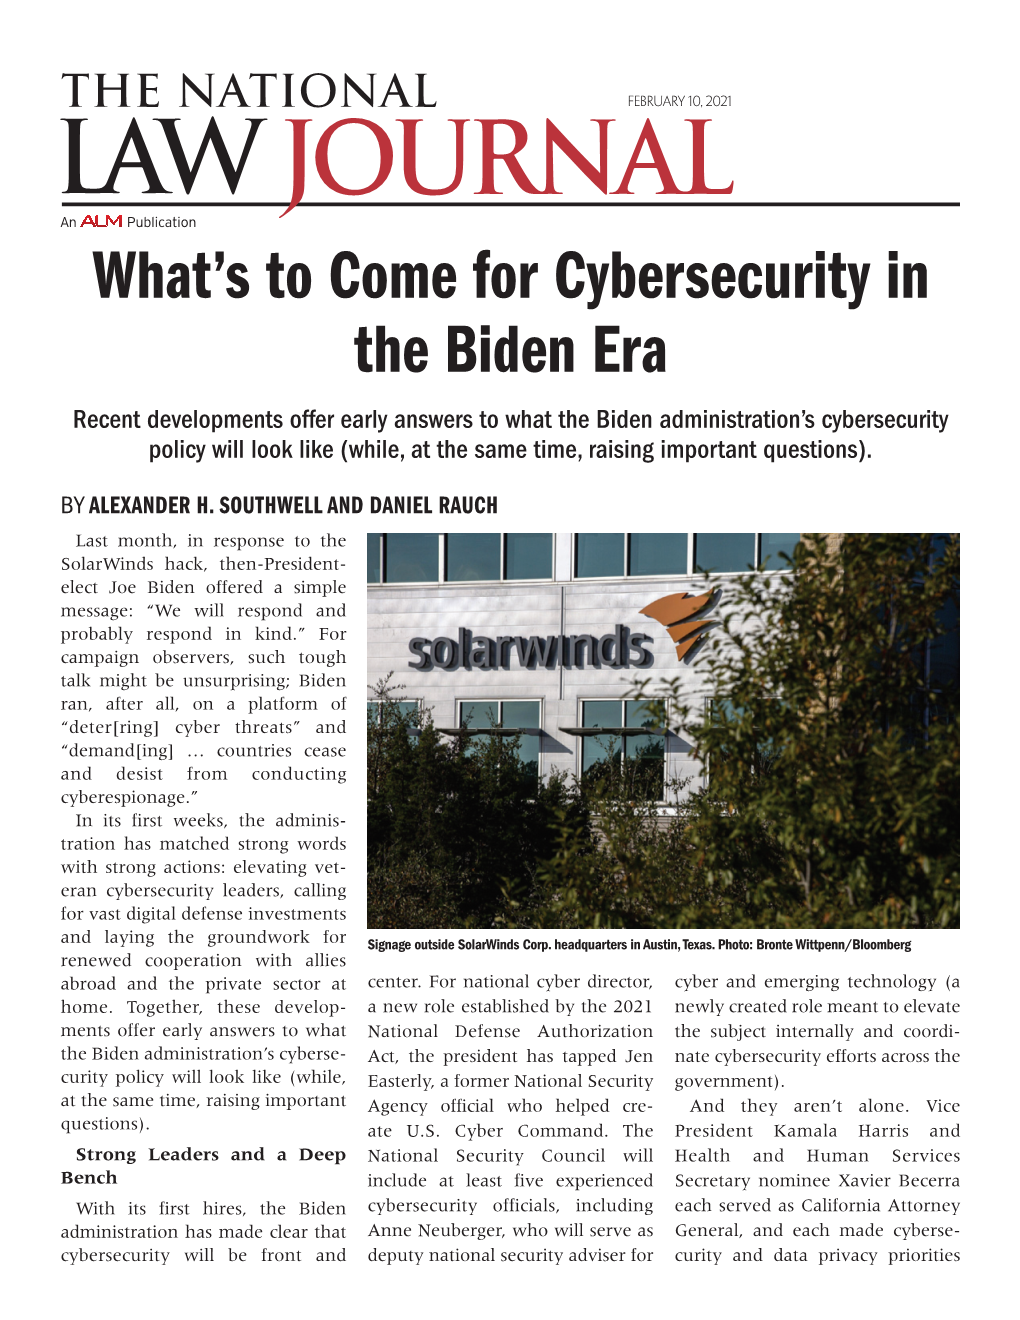 What's to Come for Cybersecurity in the Biden